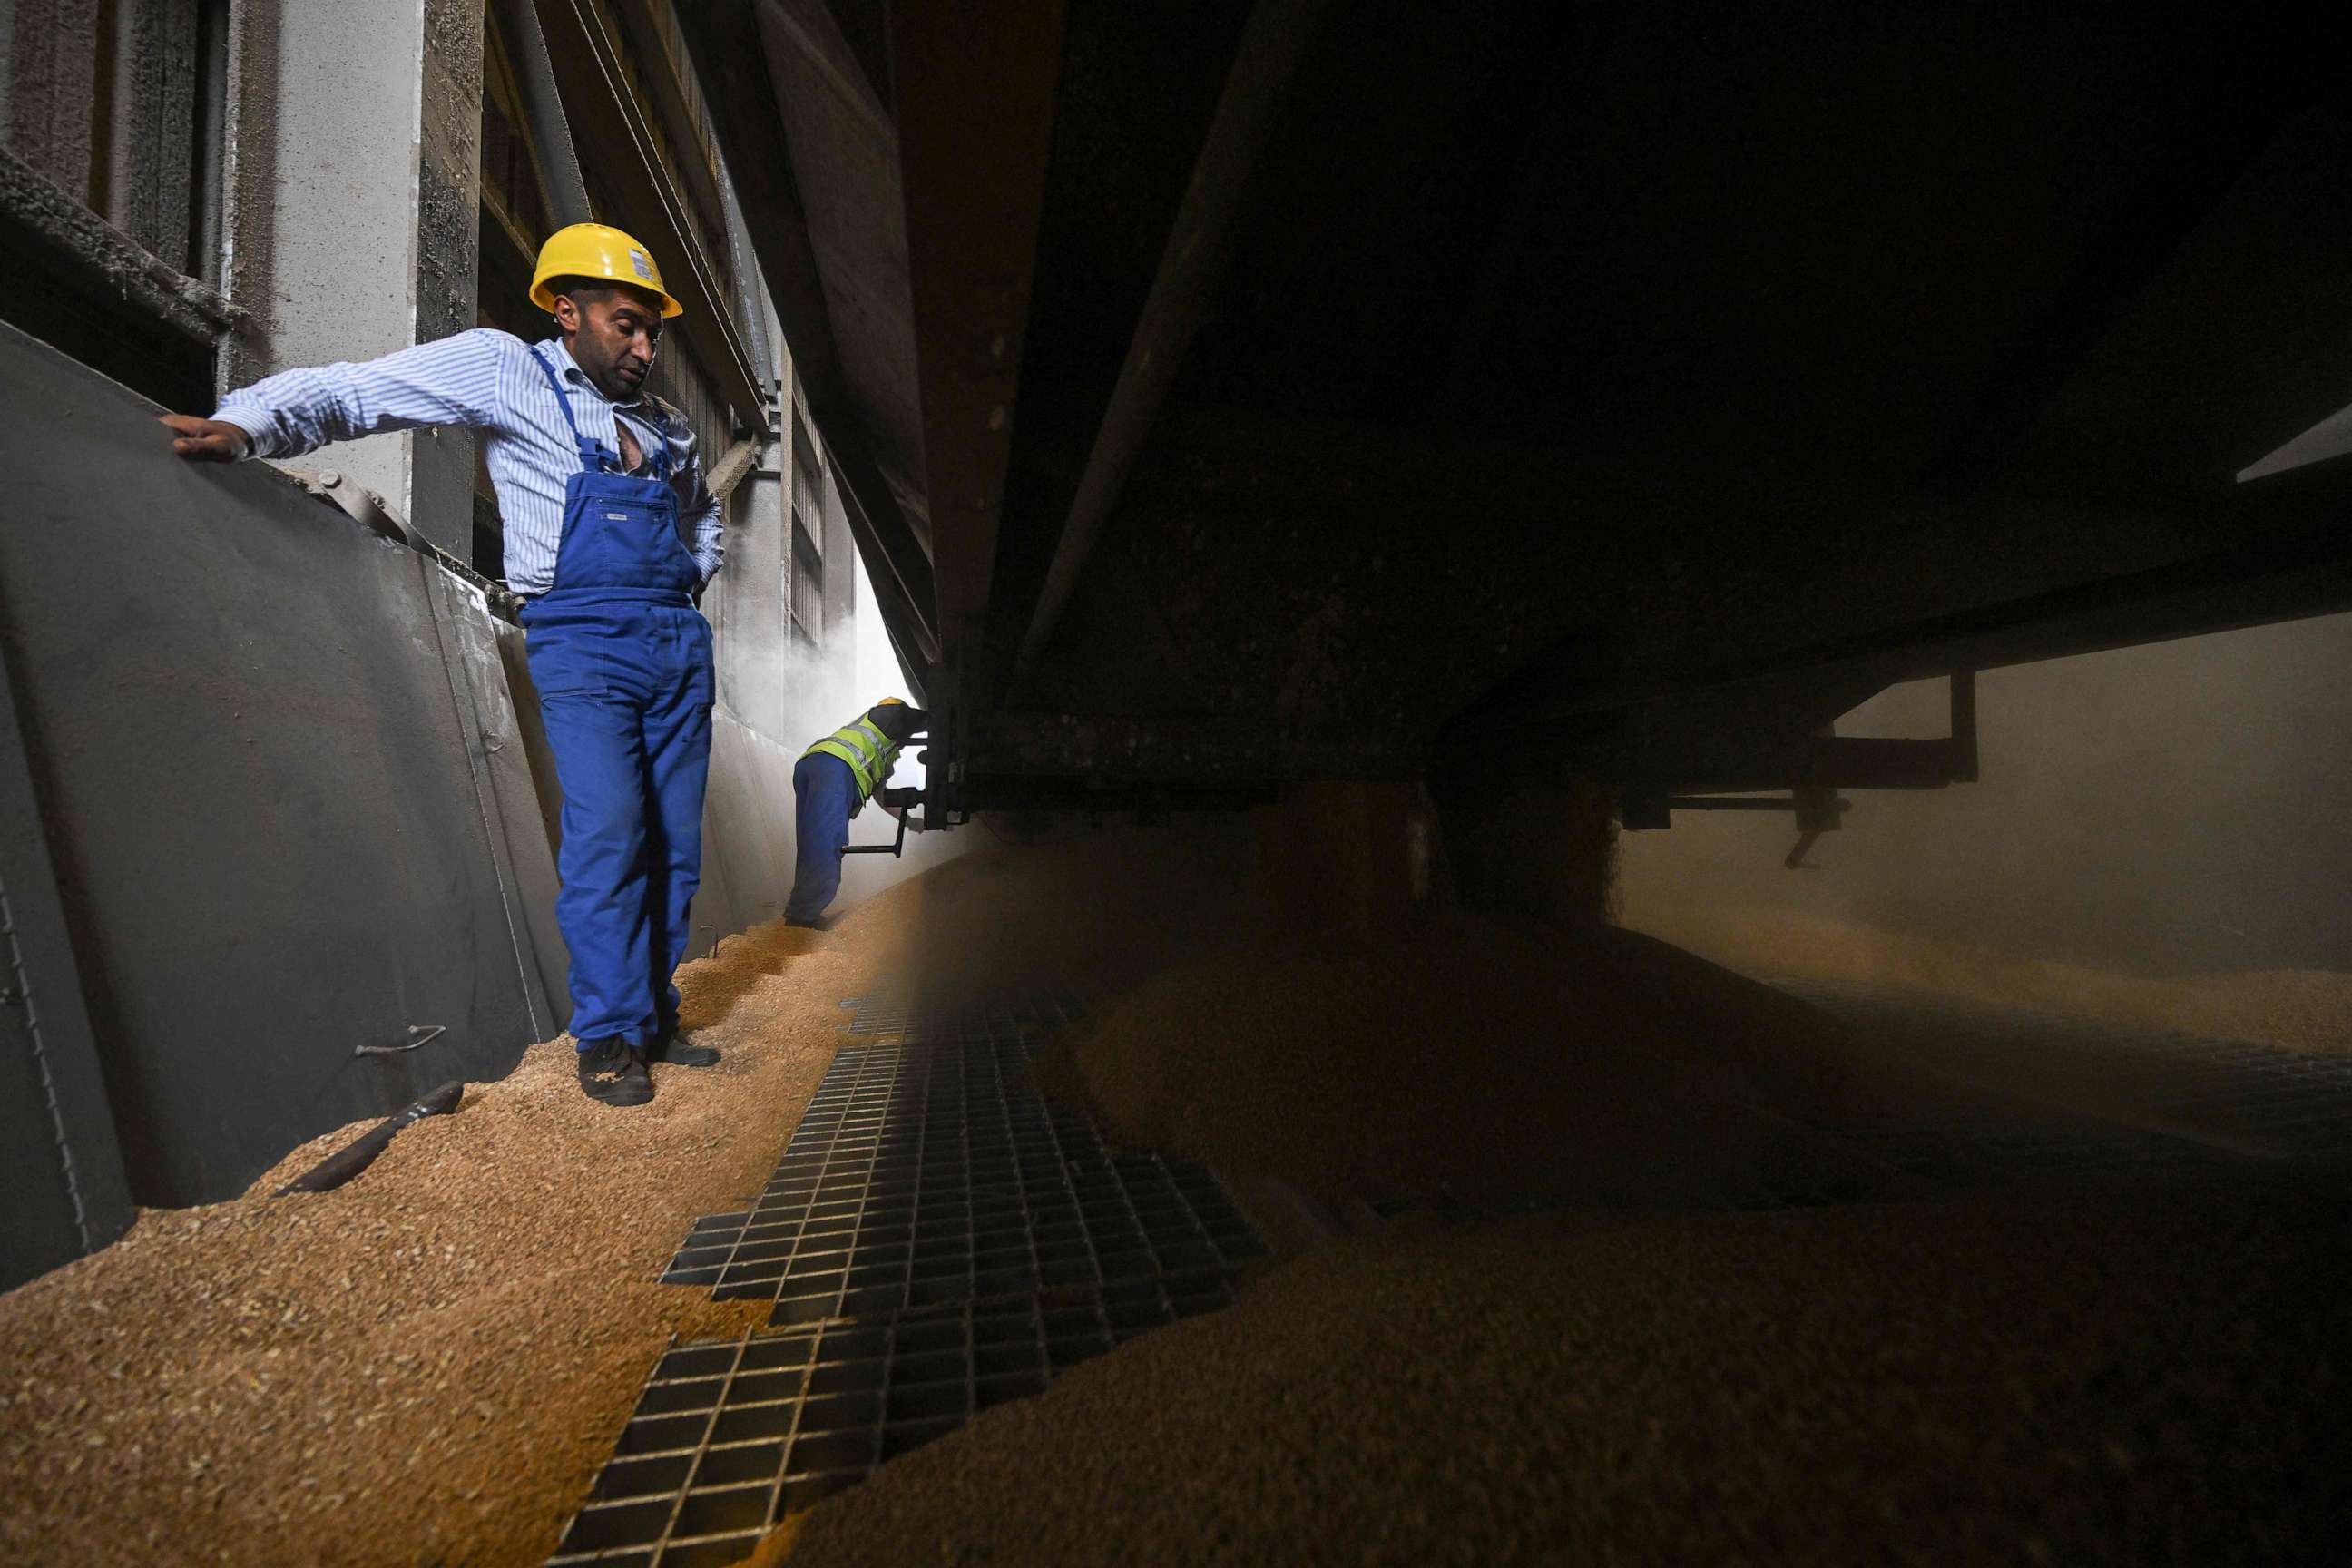 PHOTO: Workers open the hatches of a wheat transporting train car in Constanta harbor, Romania on July 31, 2023. Since the beginning of the war in neighbouring Ukraine, Constanta, the largest port for cereals in Europe.